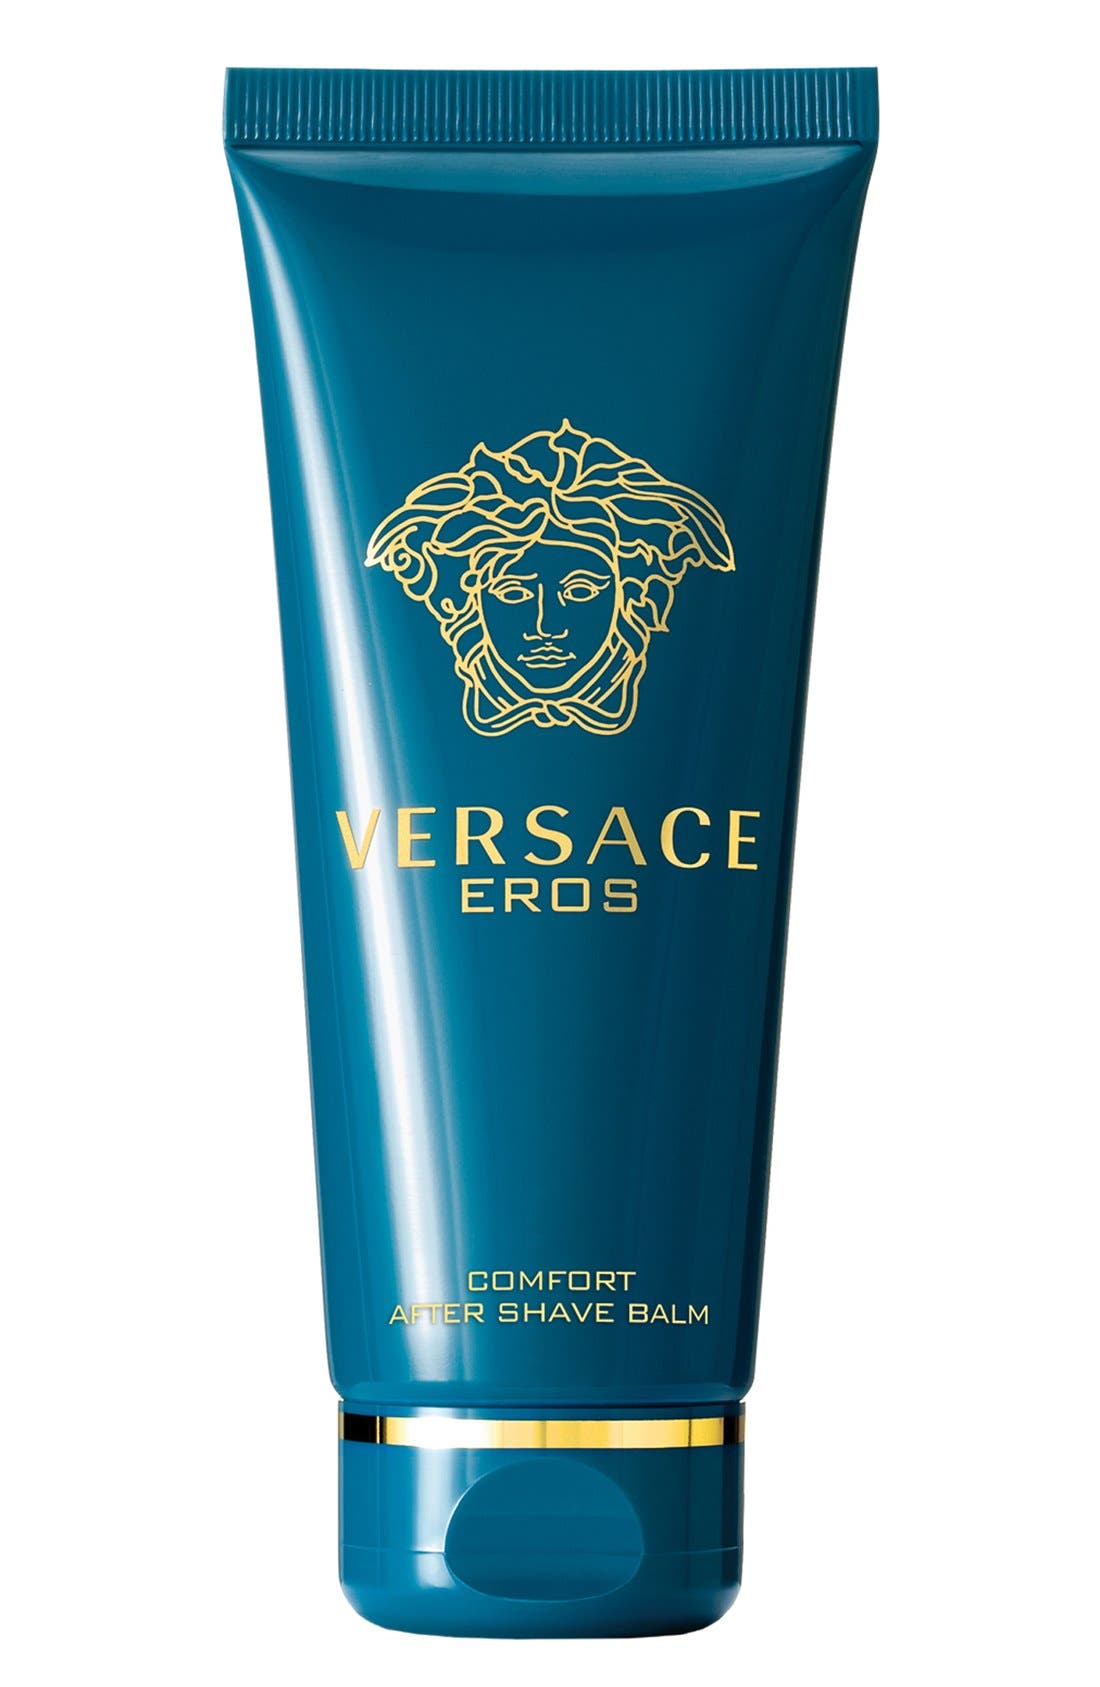 Versace 'Eros' After Shave Balm at Nordstrom, Size 3.4 Oz